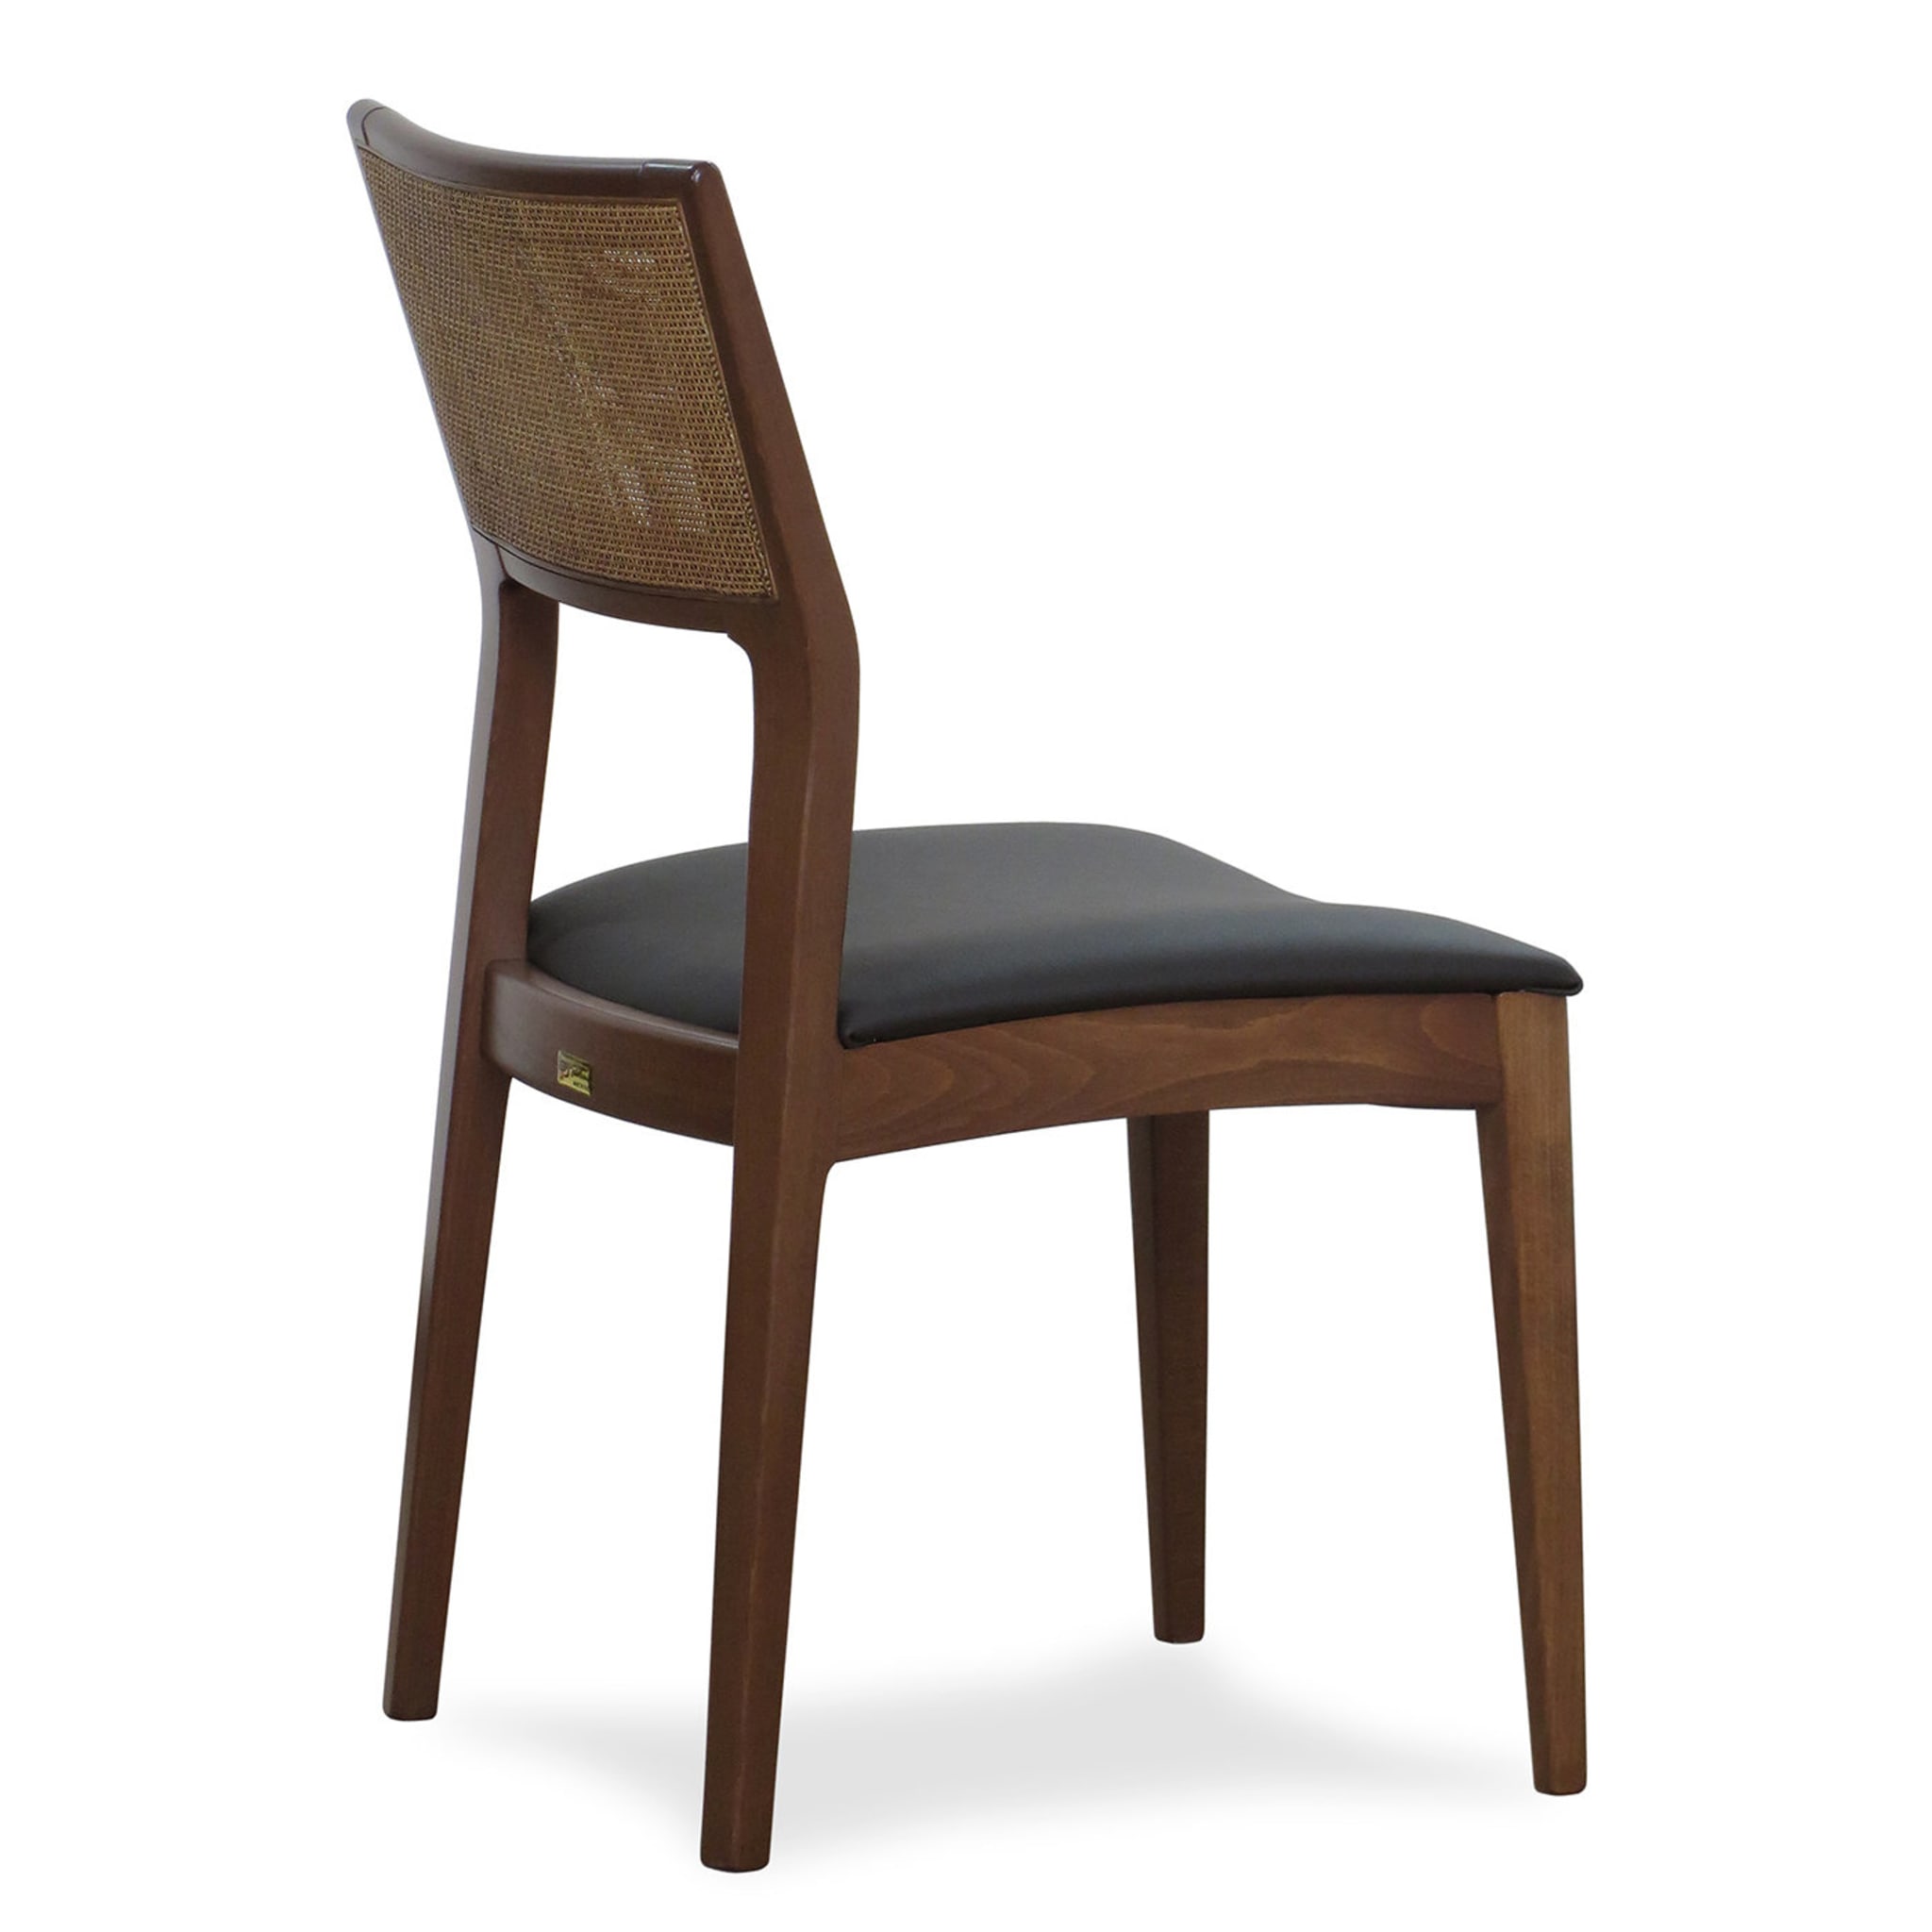 DOM-6 Set of 2 Chairs - Alternative view 1